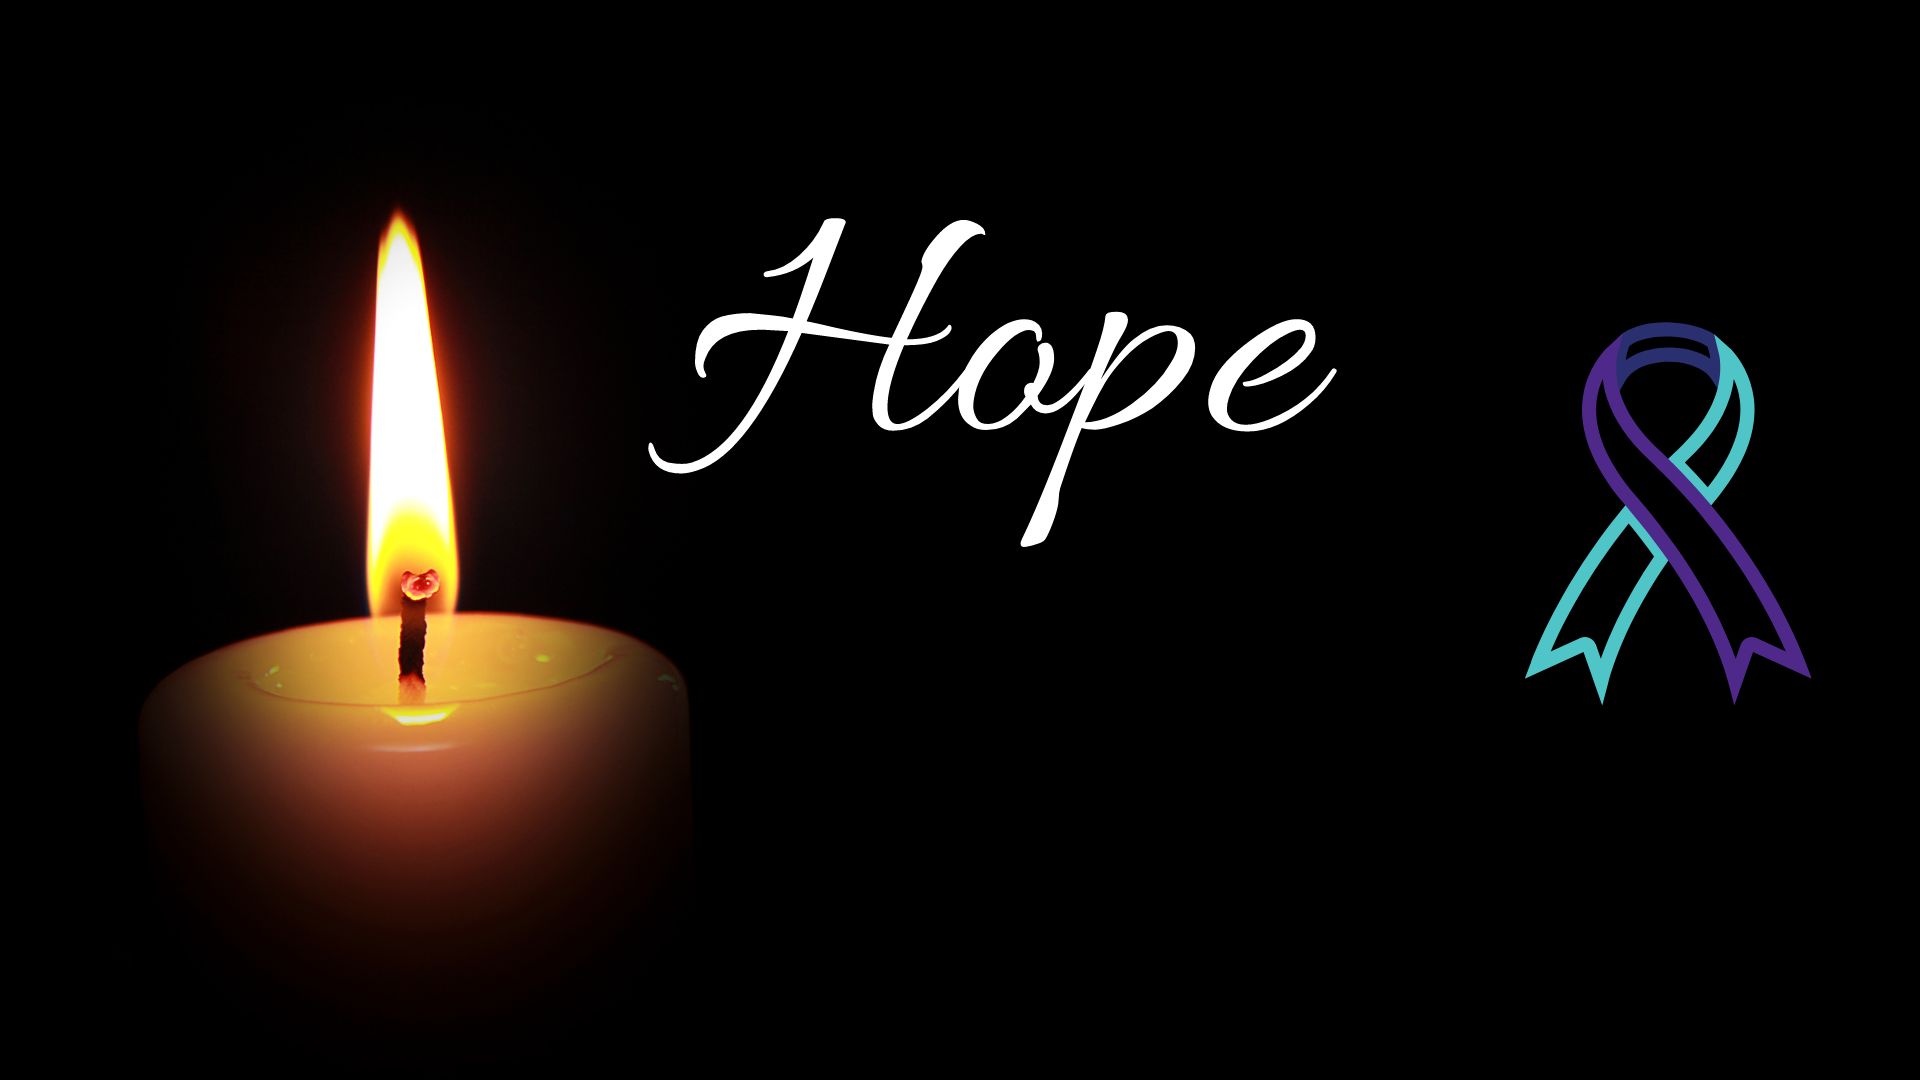 A black background with a candle lit on the left hand side, a purple and teal ribbon on the right and the word "Hope" written in white in the center